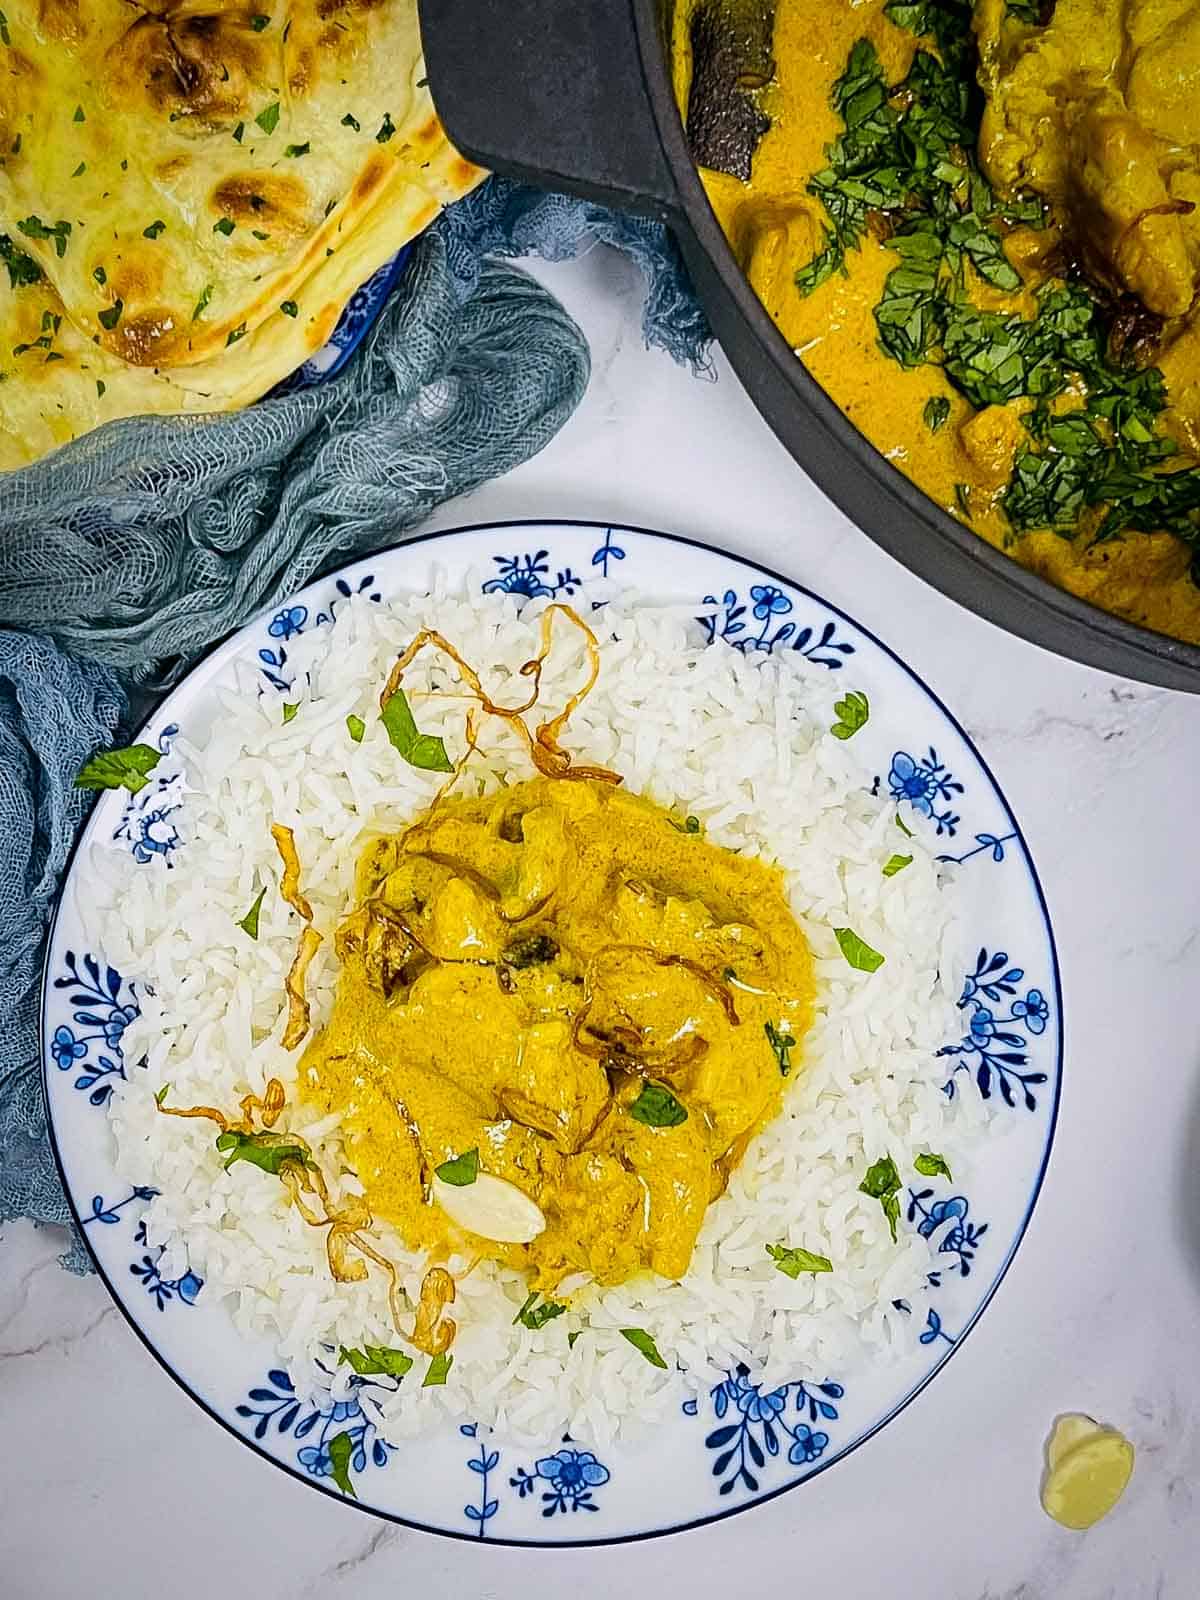 Chicken korma served with basmati rice and naan.